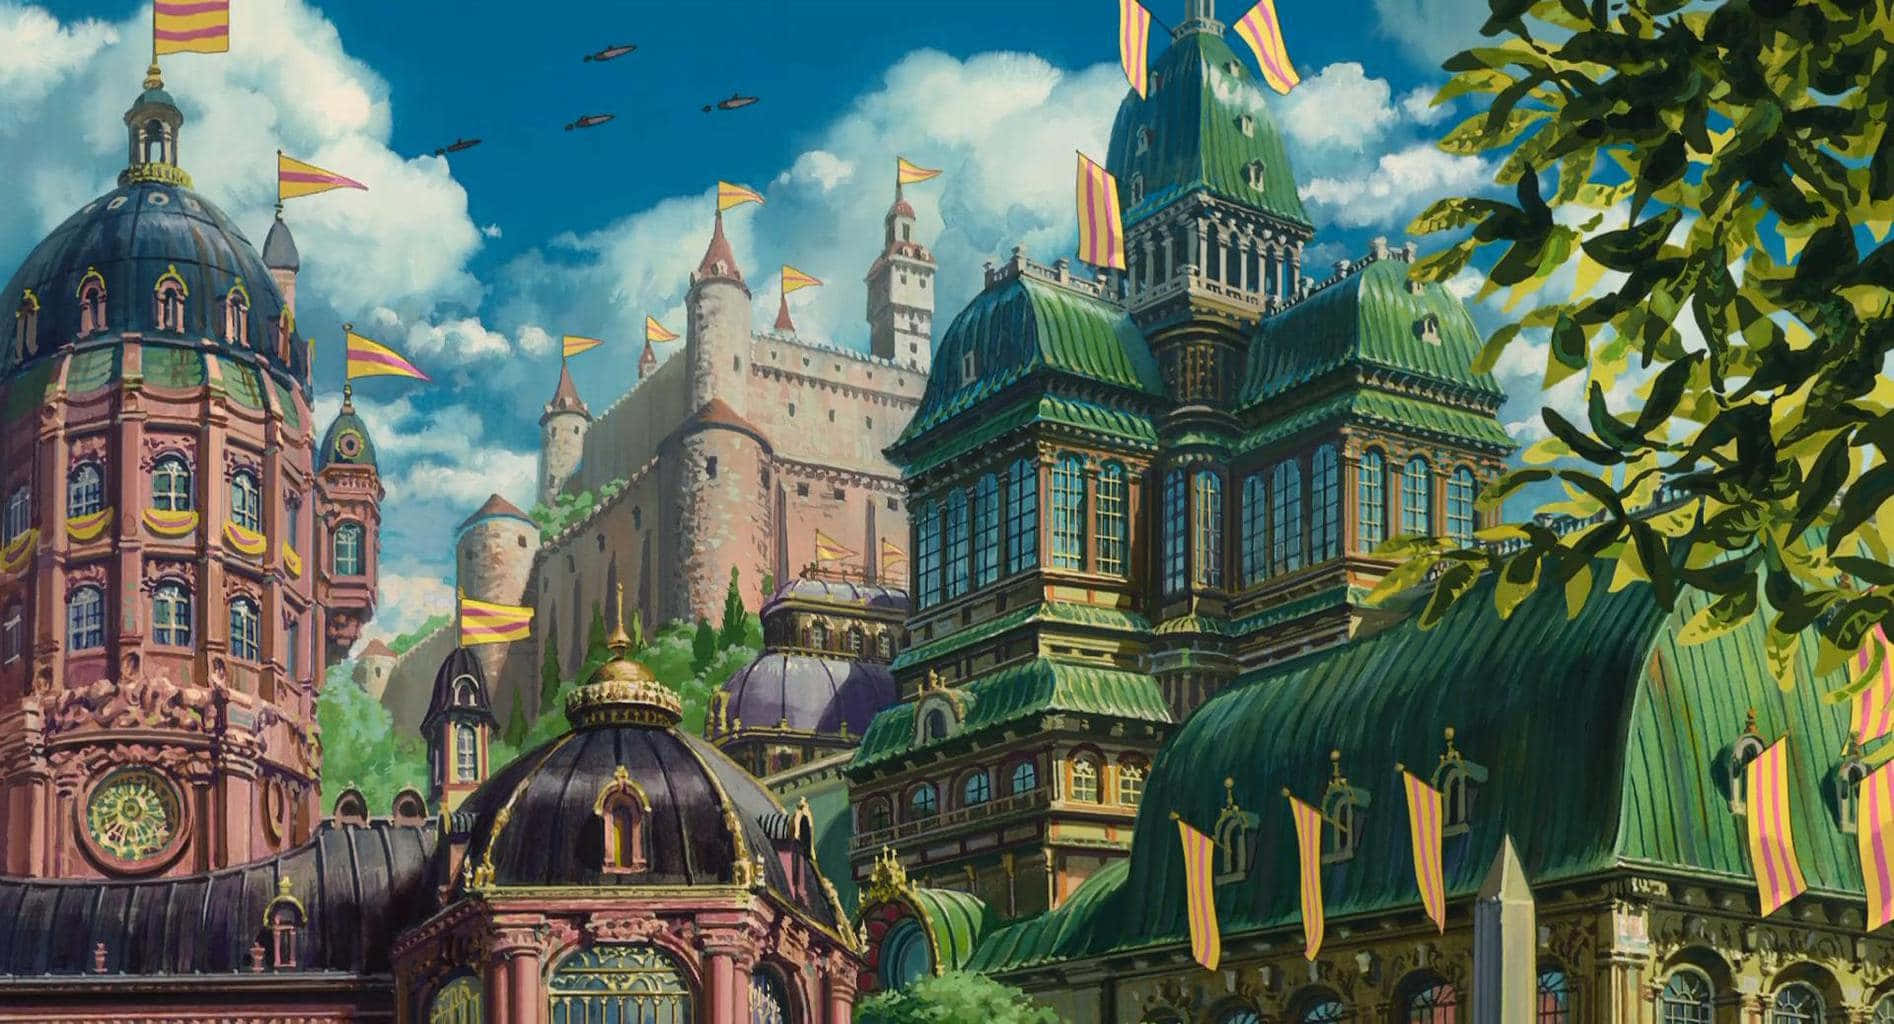 Get Ready for an Adventure in the Stunning World of Howl's Moving Castle